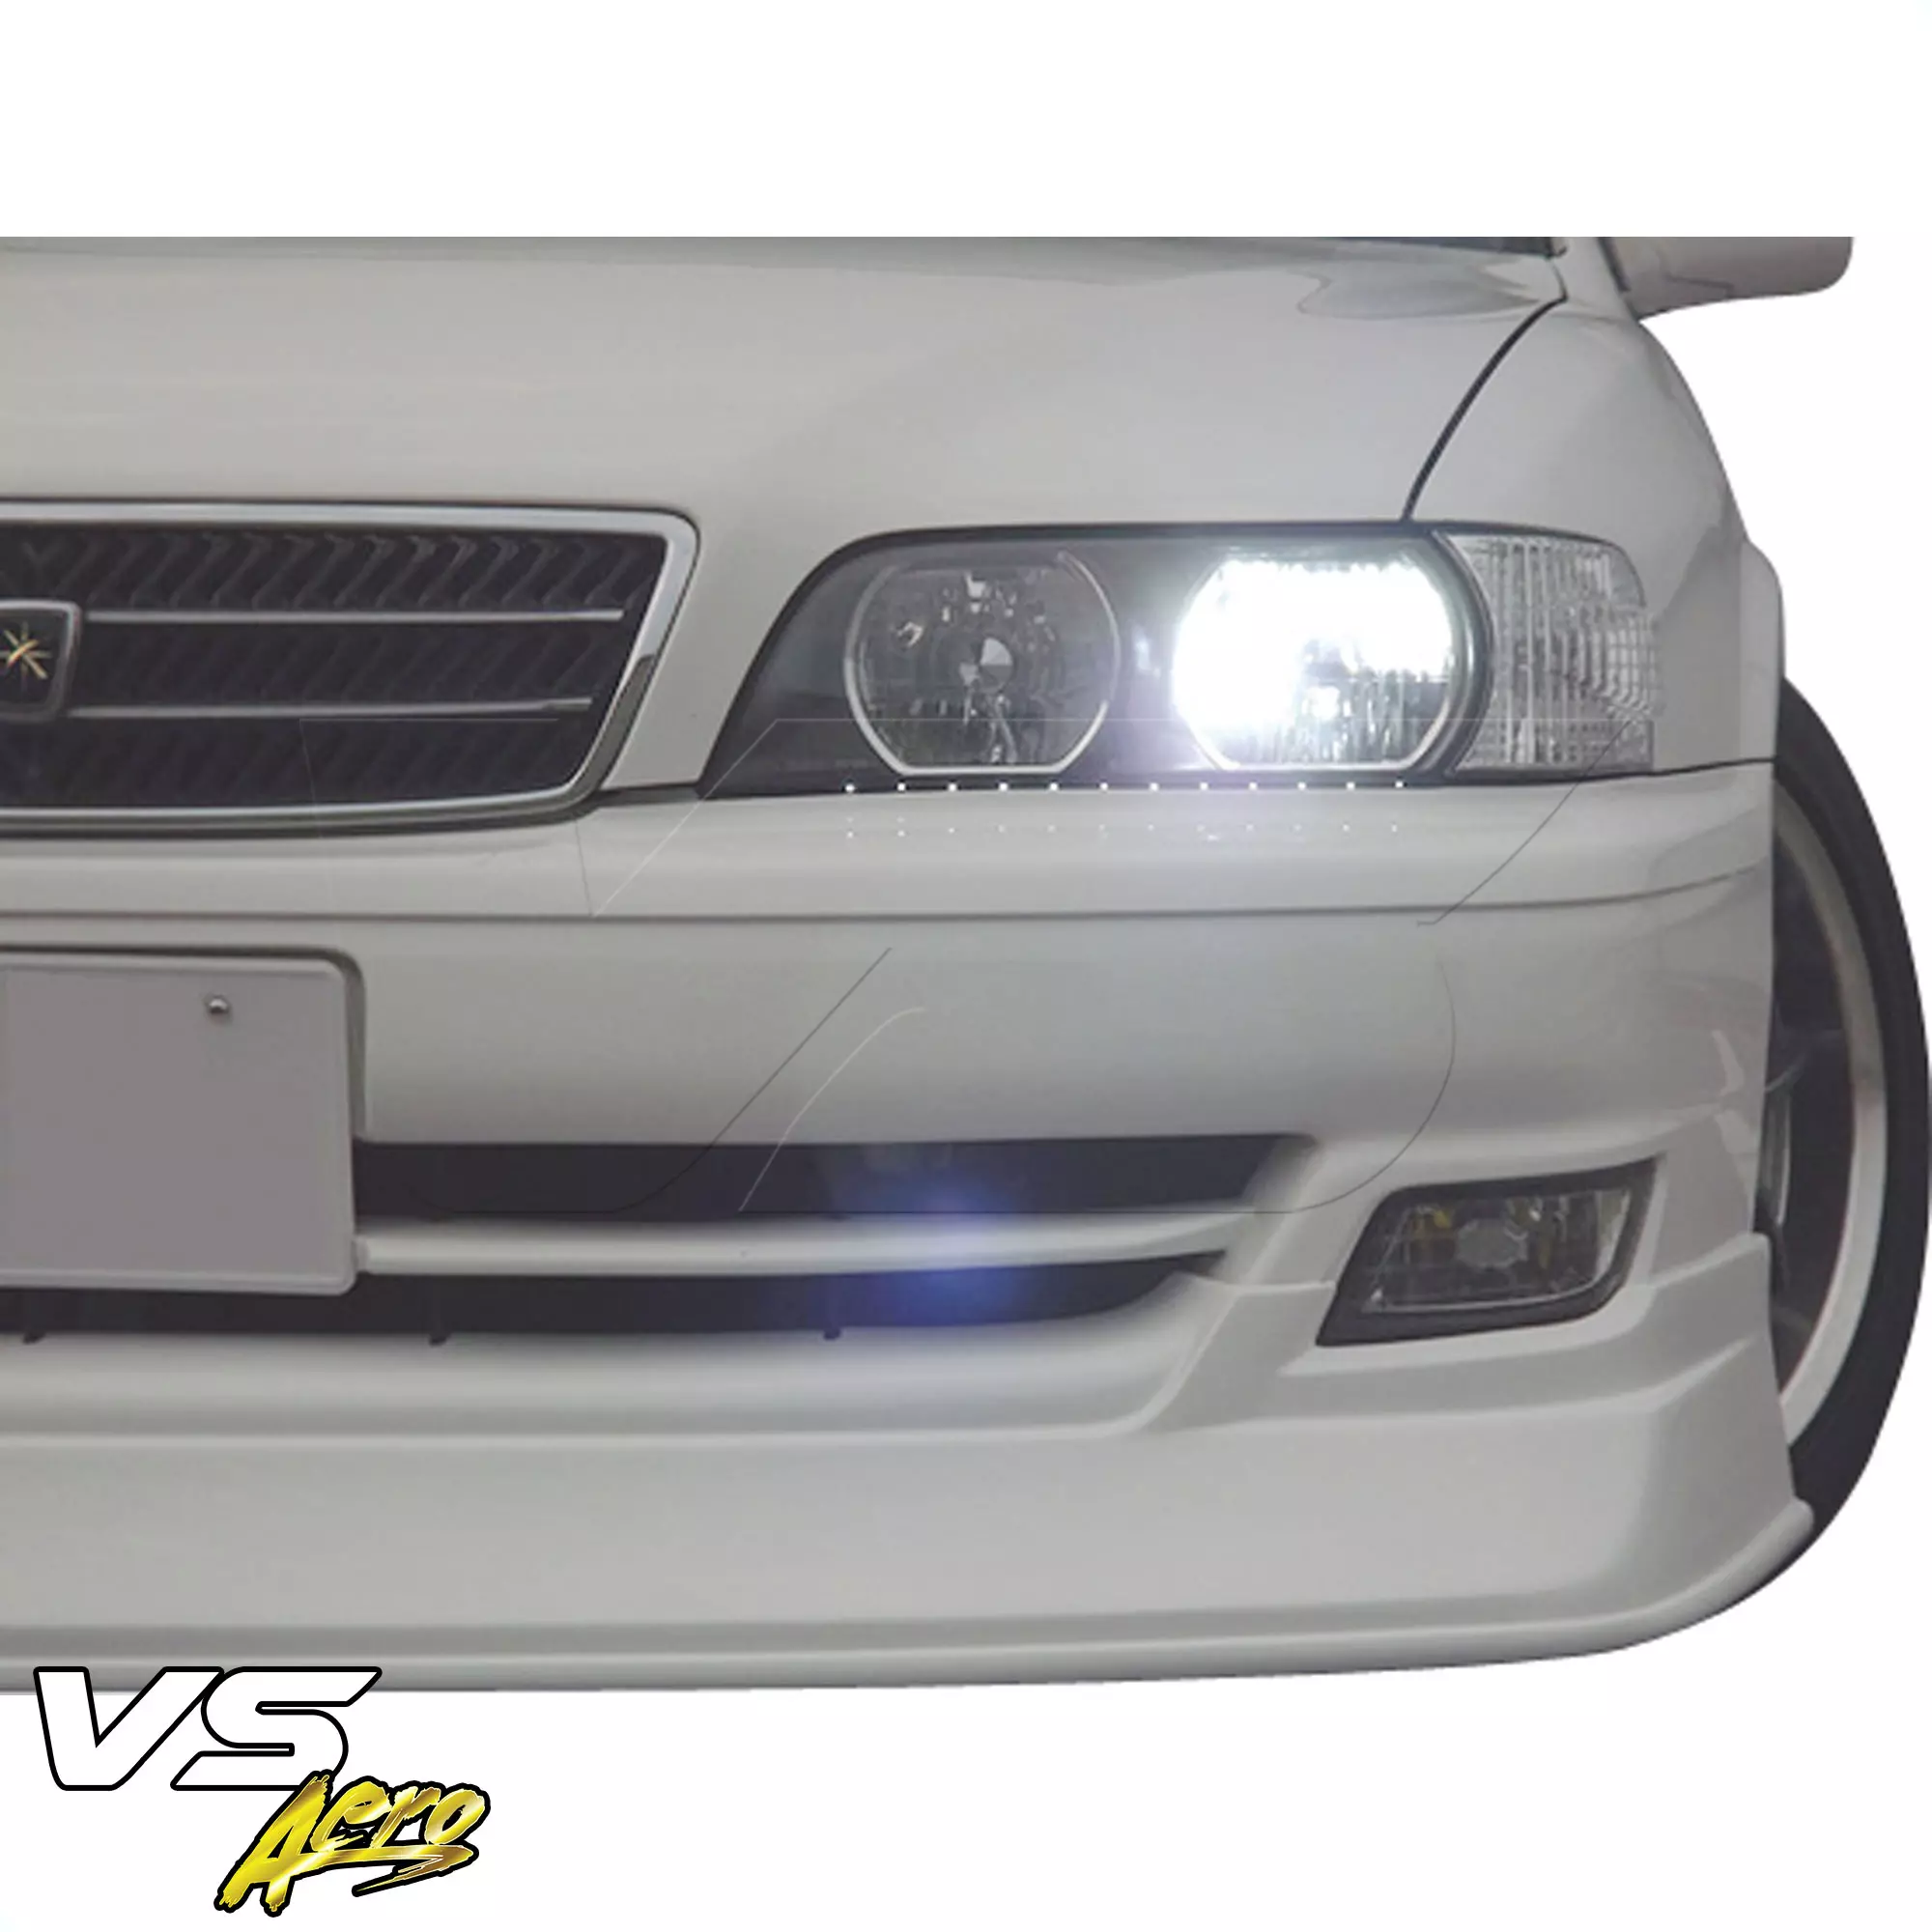 VSaero FRP TRAU Late Front Lip Valance > Toyota Chaser JZX100 1999-2000 - Image 5